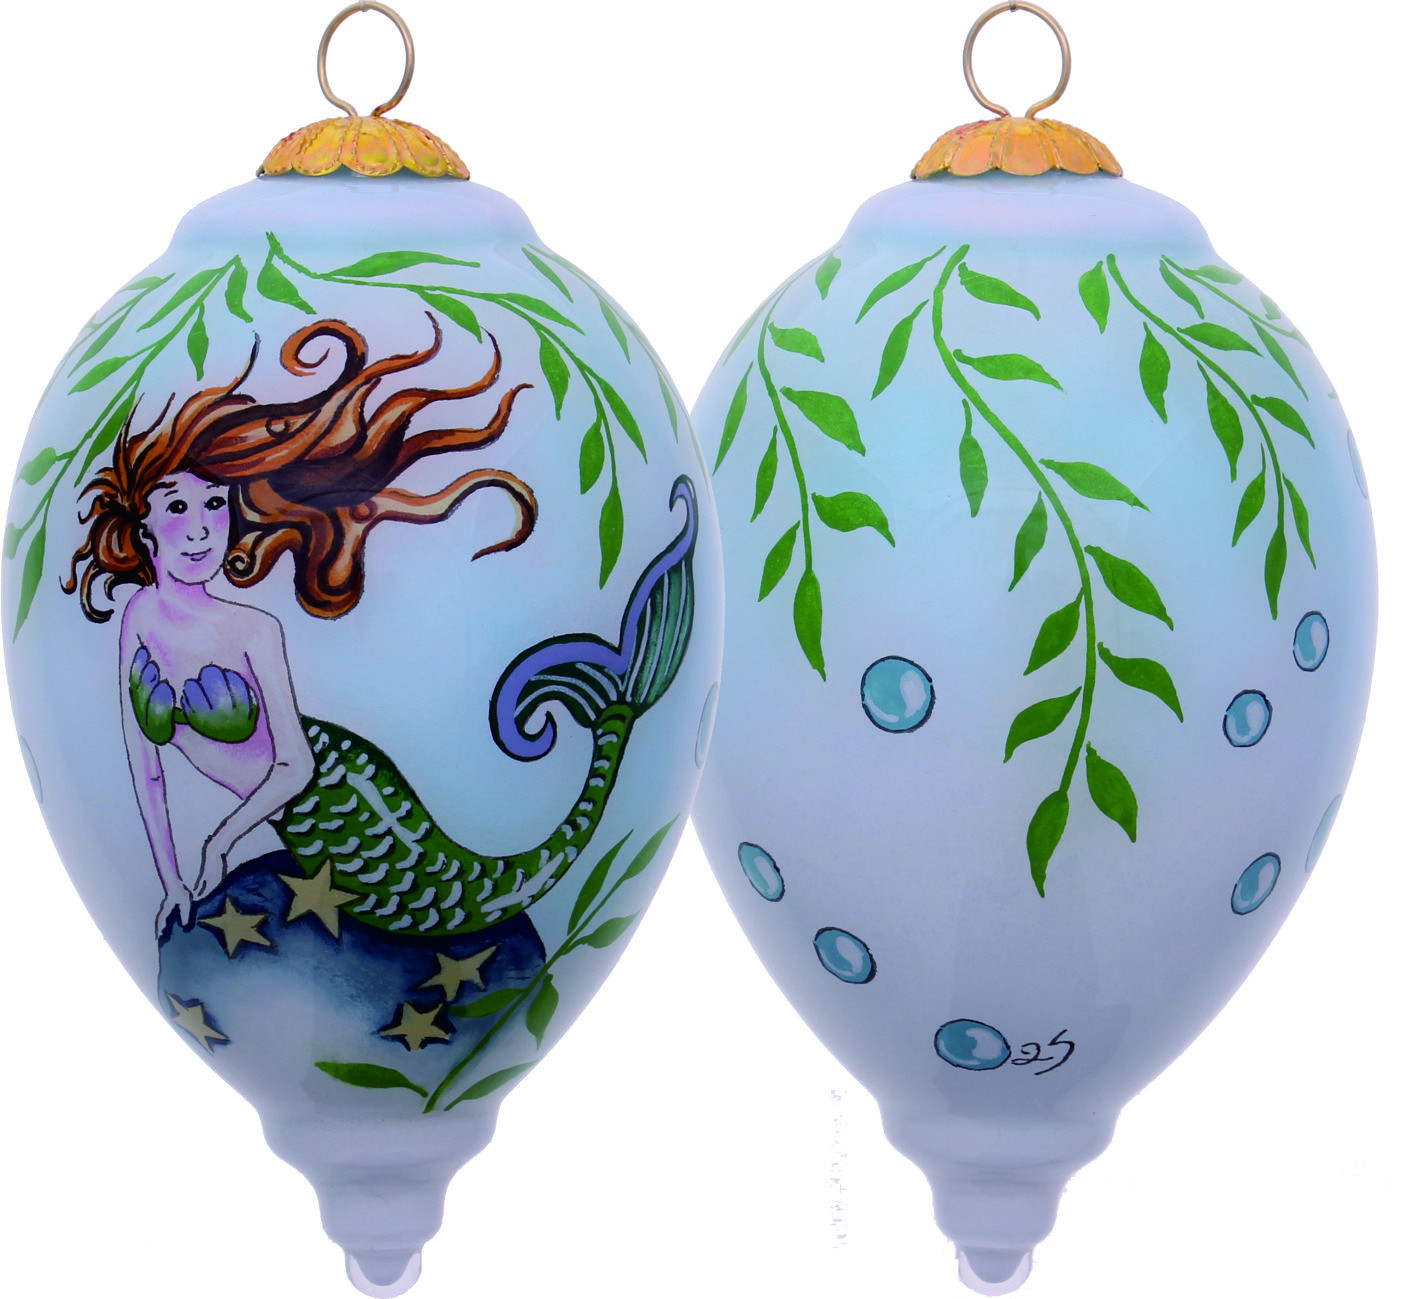 Green Mermaid Hand Painted Mouth Blown Glass Ornament